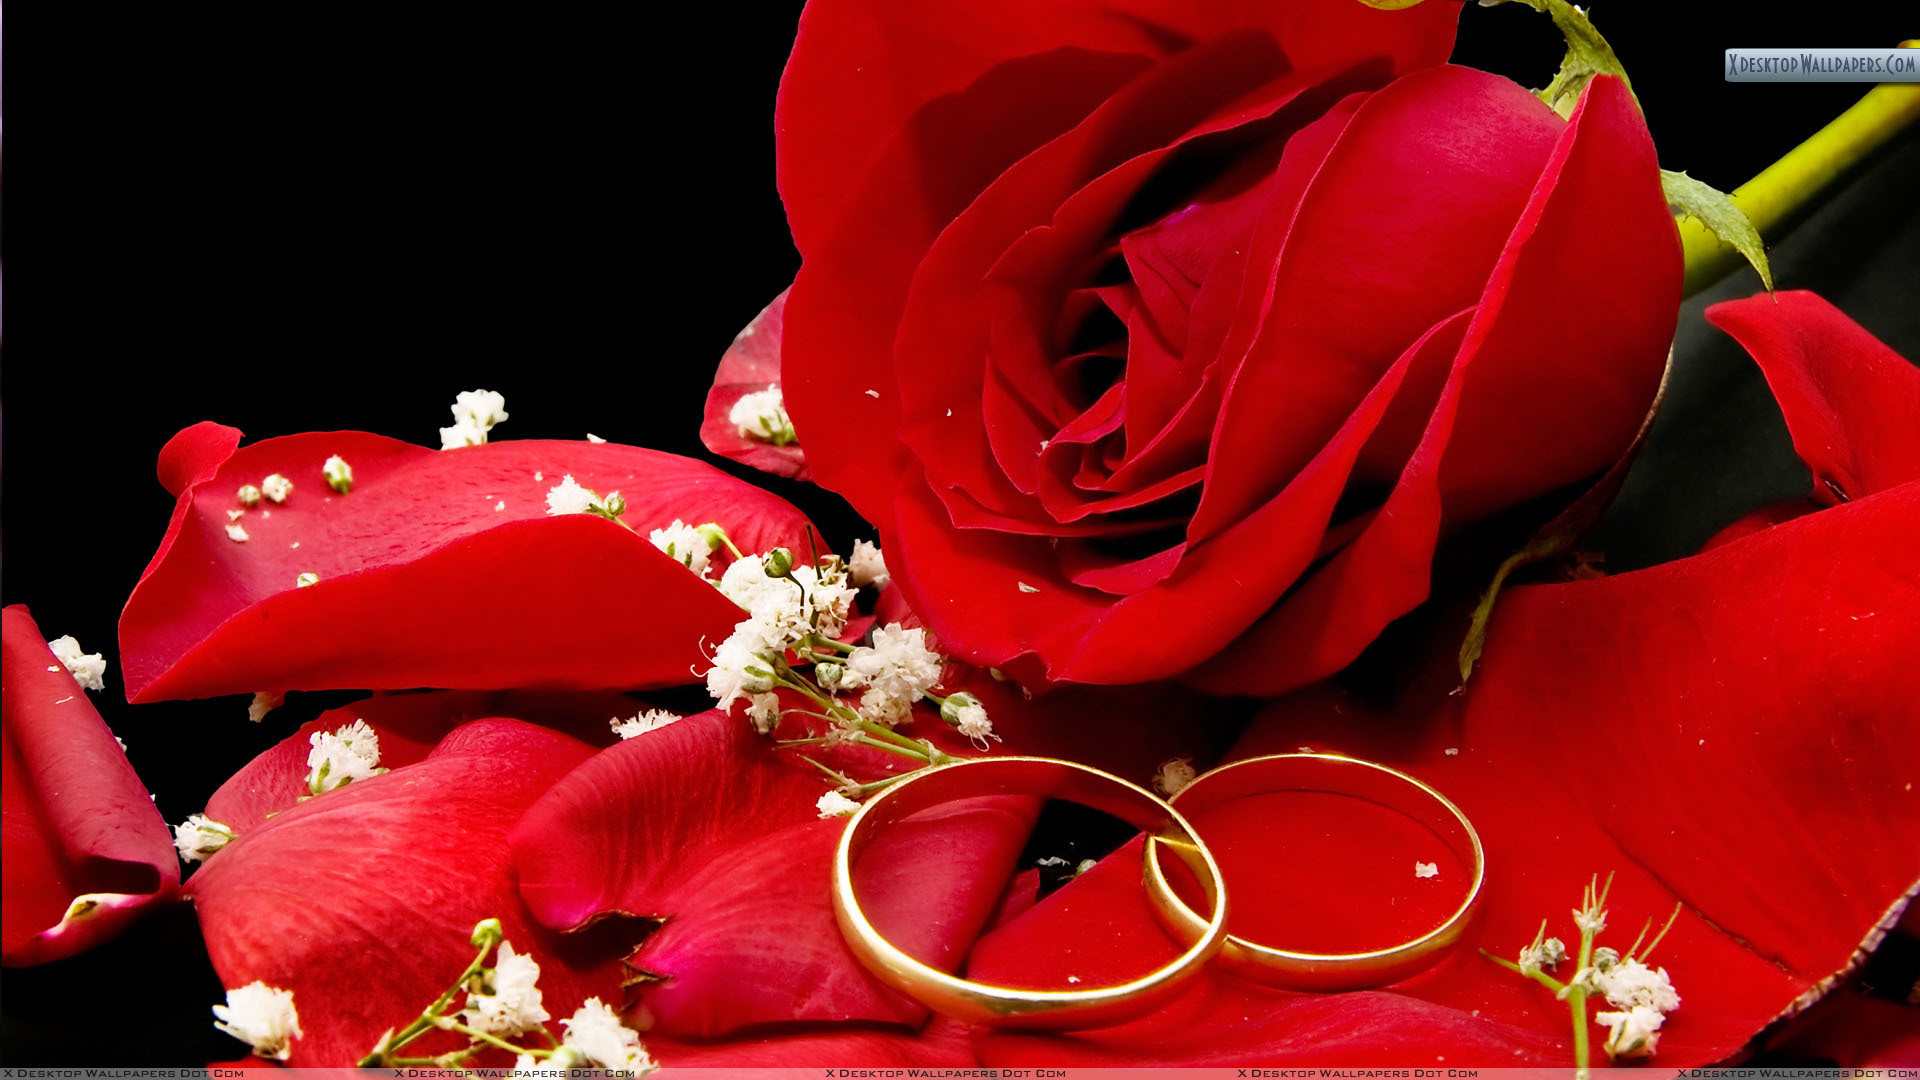 1920x1080 Red rose and wedding rings on a black background